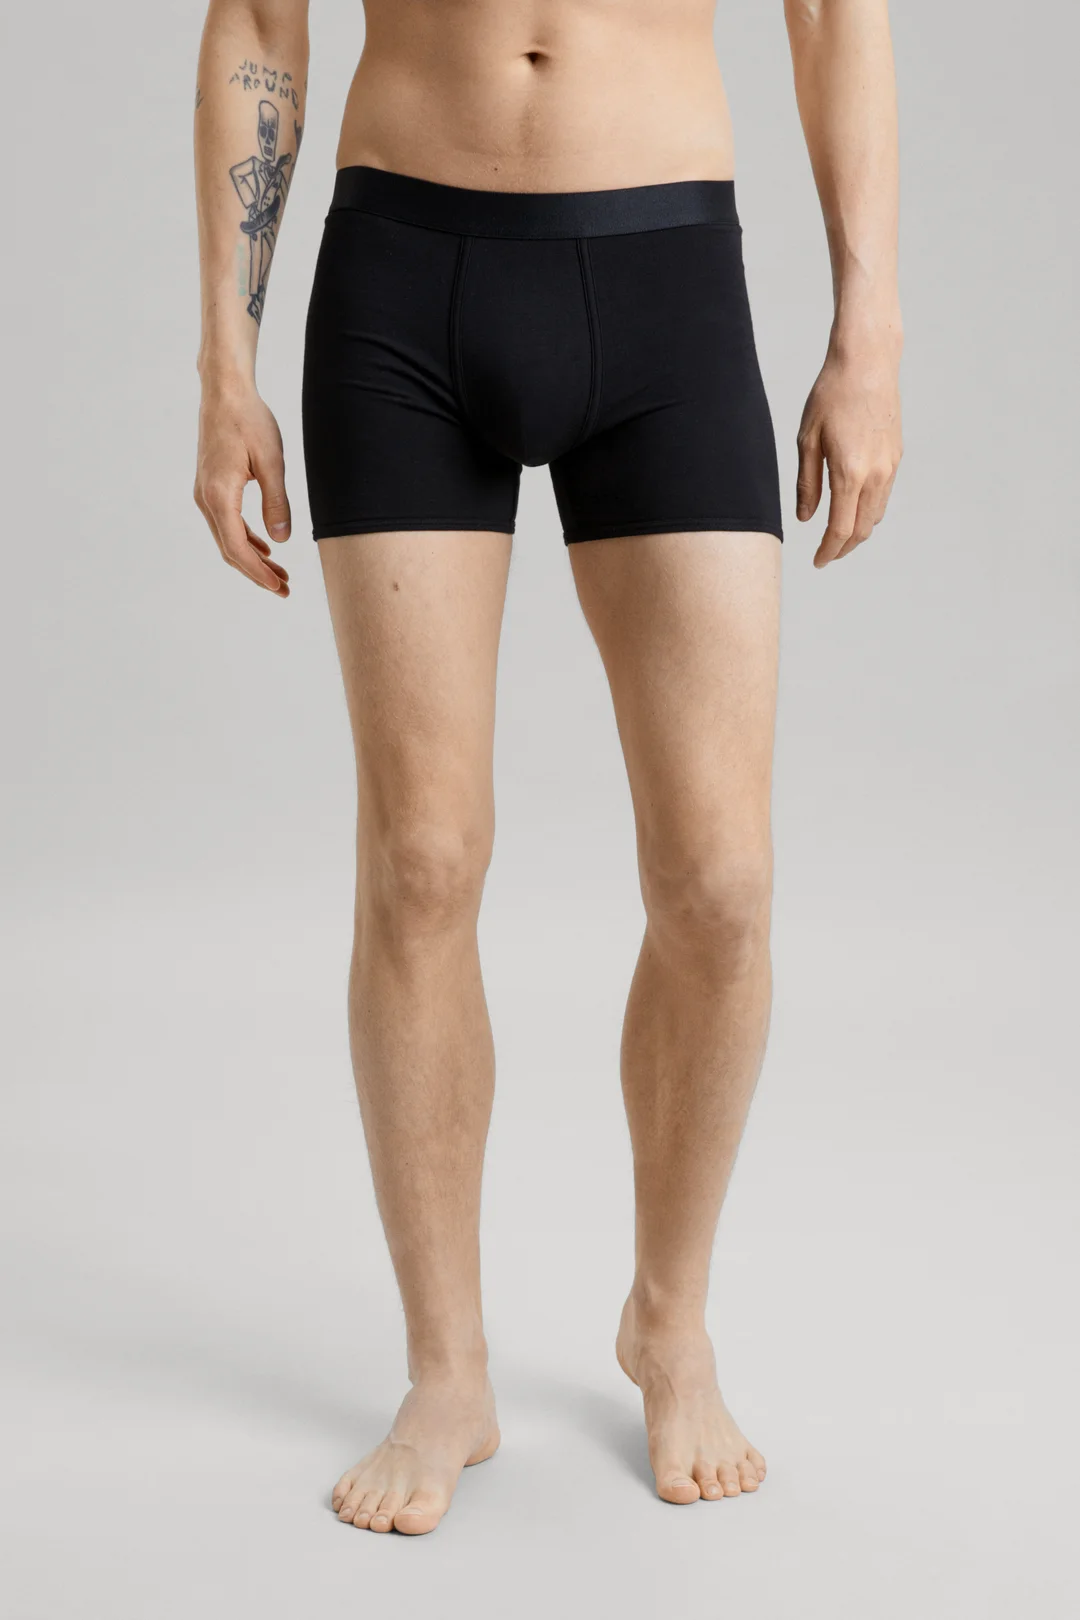 Men's Underwear  Sustainable Clothing at